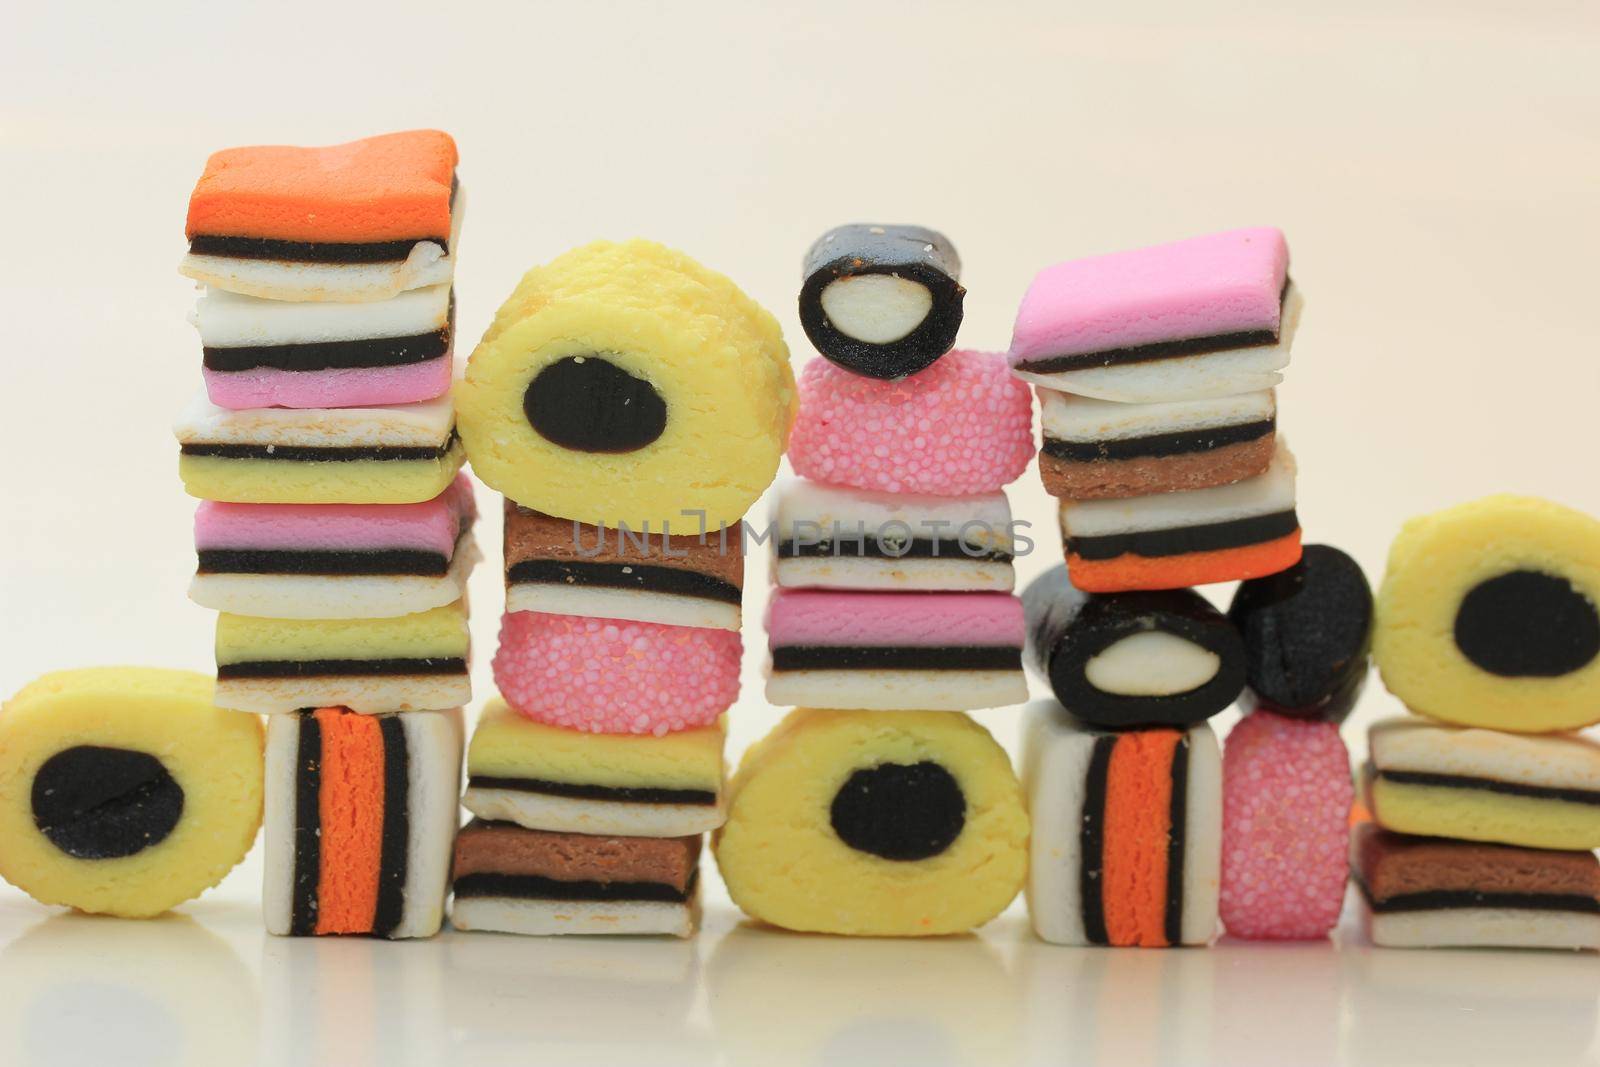 Stacked liquorice allsorts in different shapes, colors and sizes